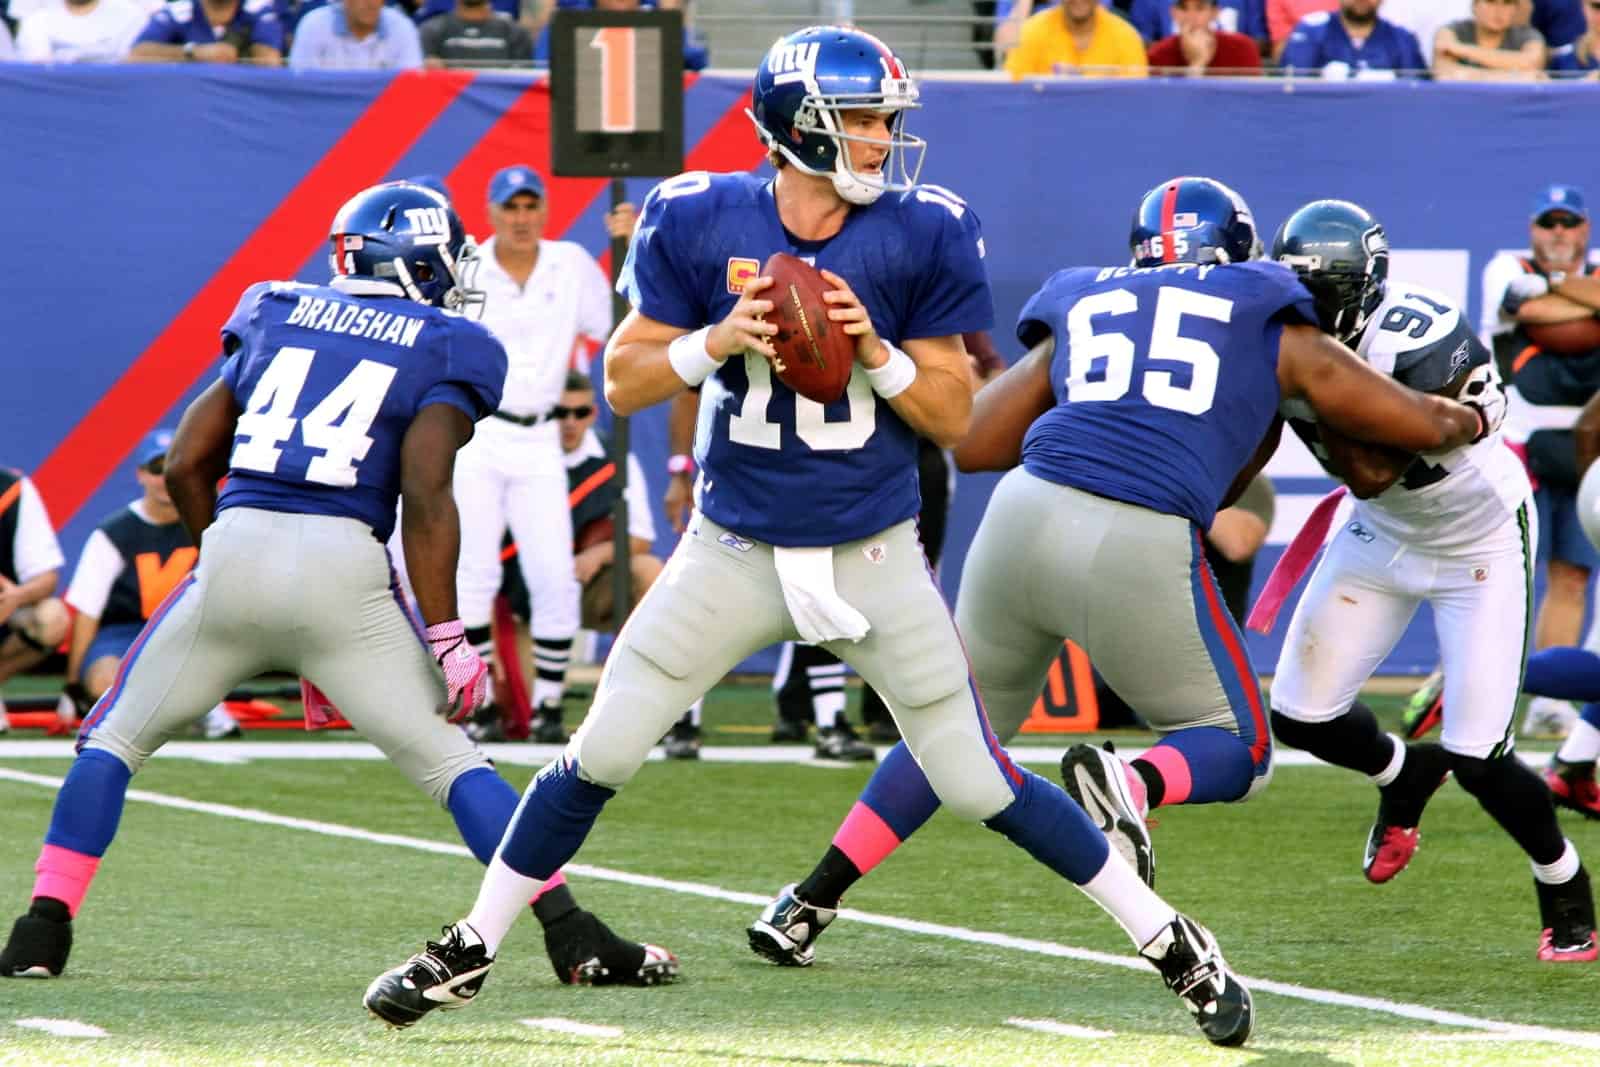 Todays New York Giants Game When and Where Do They Play on Todays Schedule?